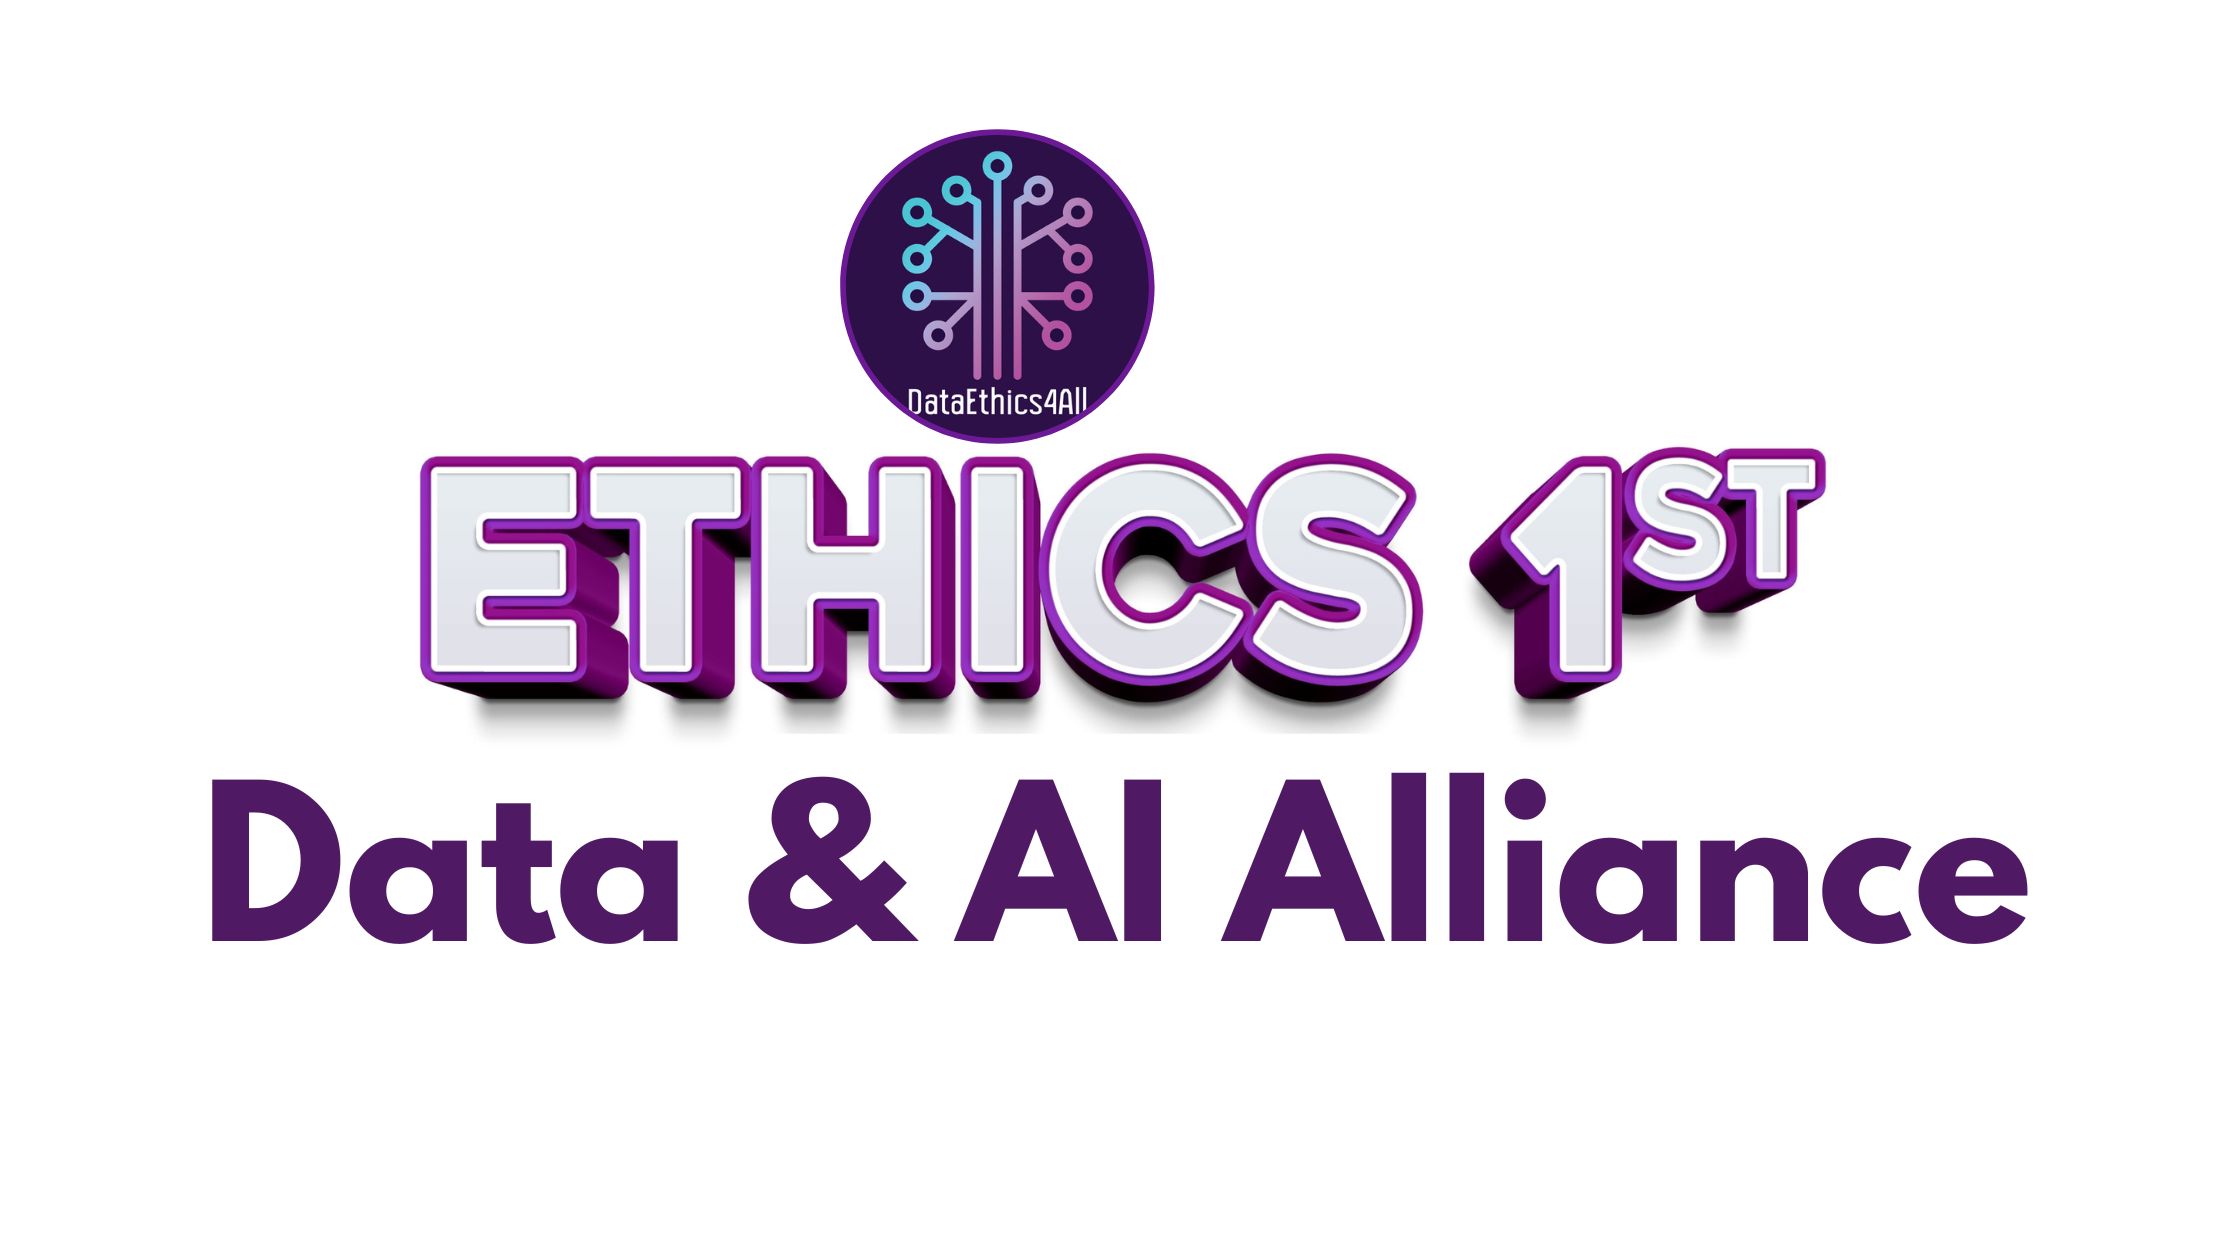 DataEthics4All's Ethics 1st Data and AI Alliance